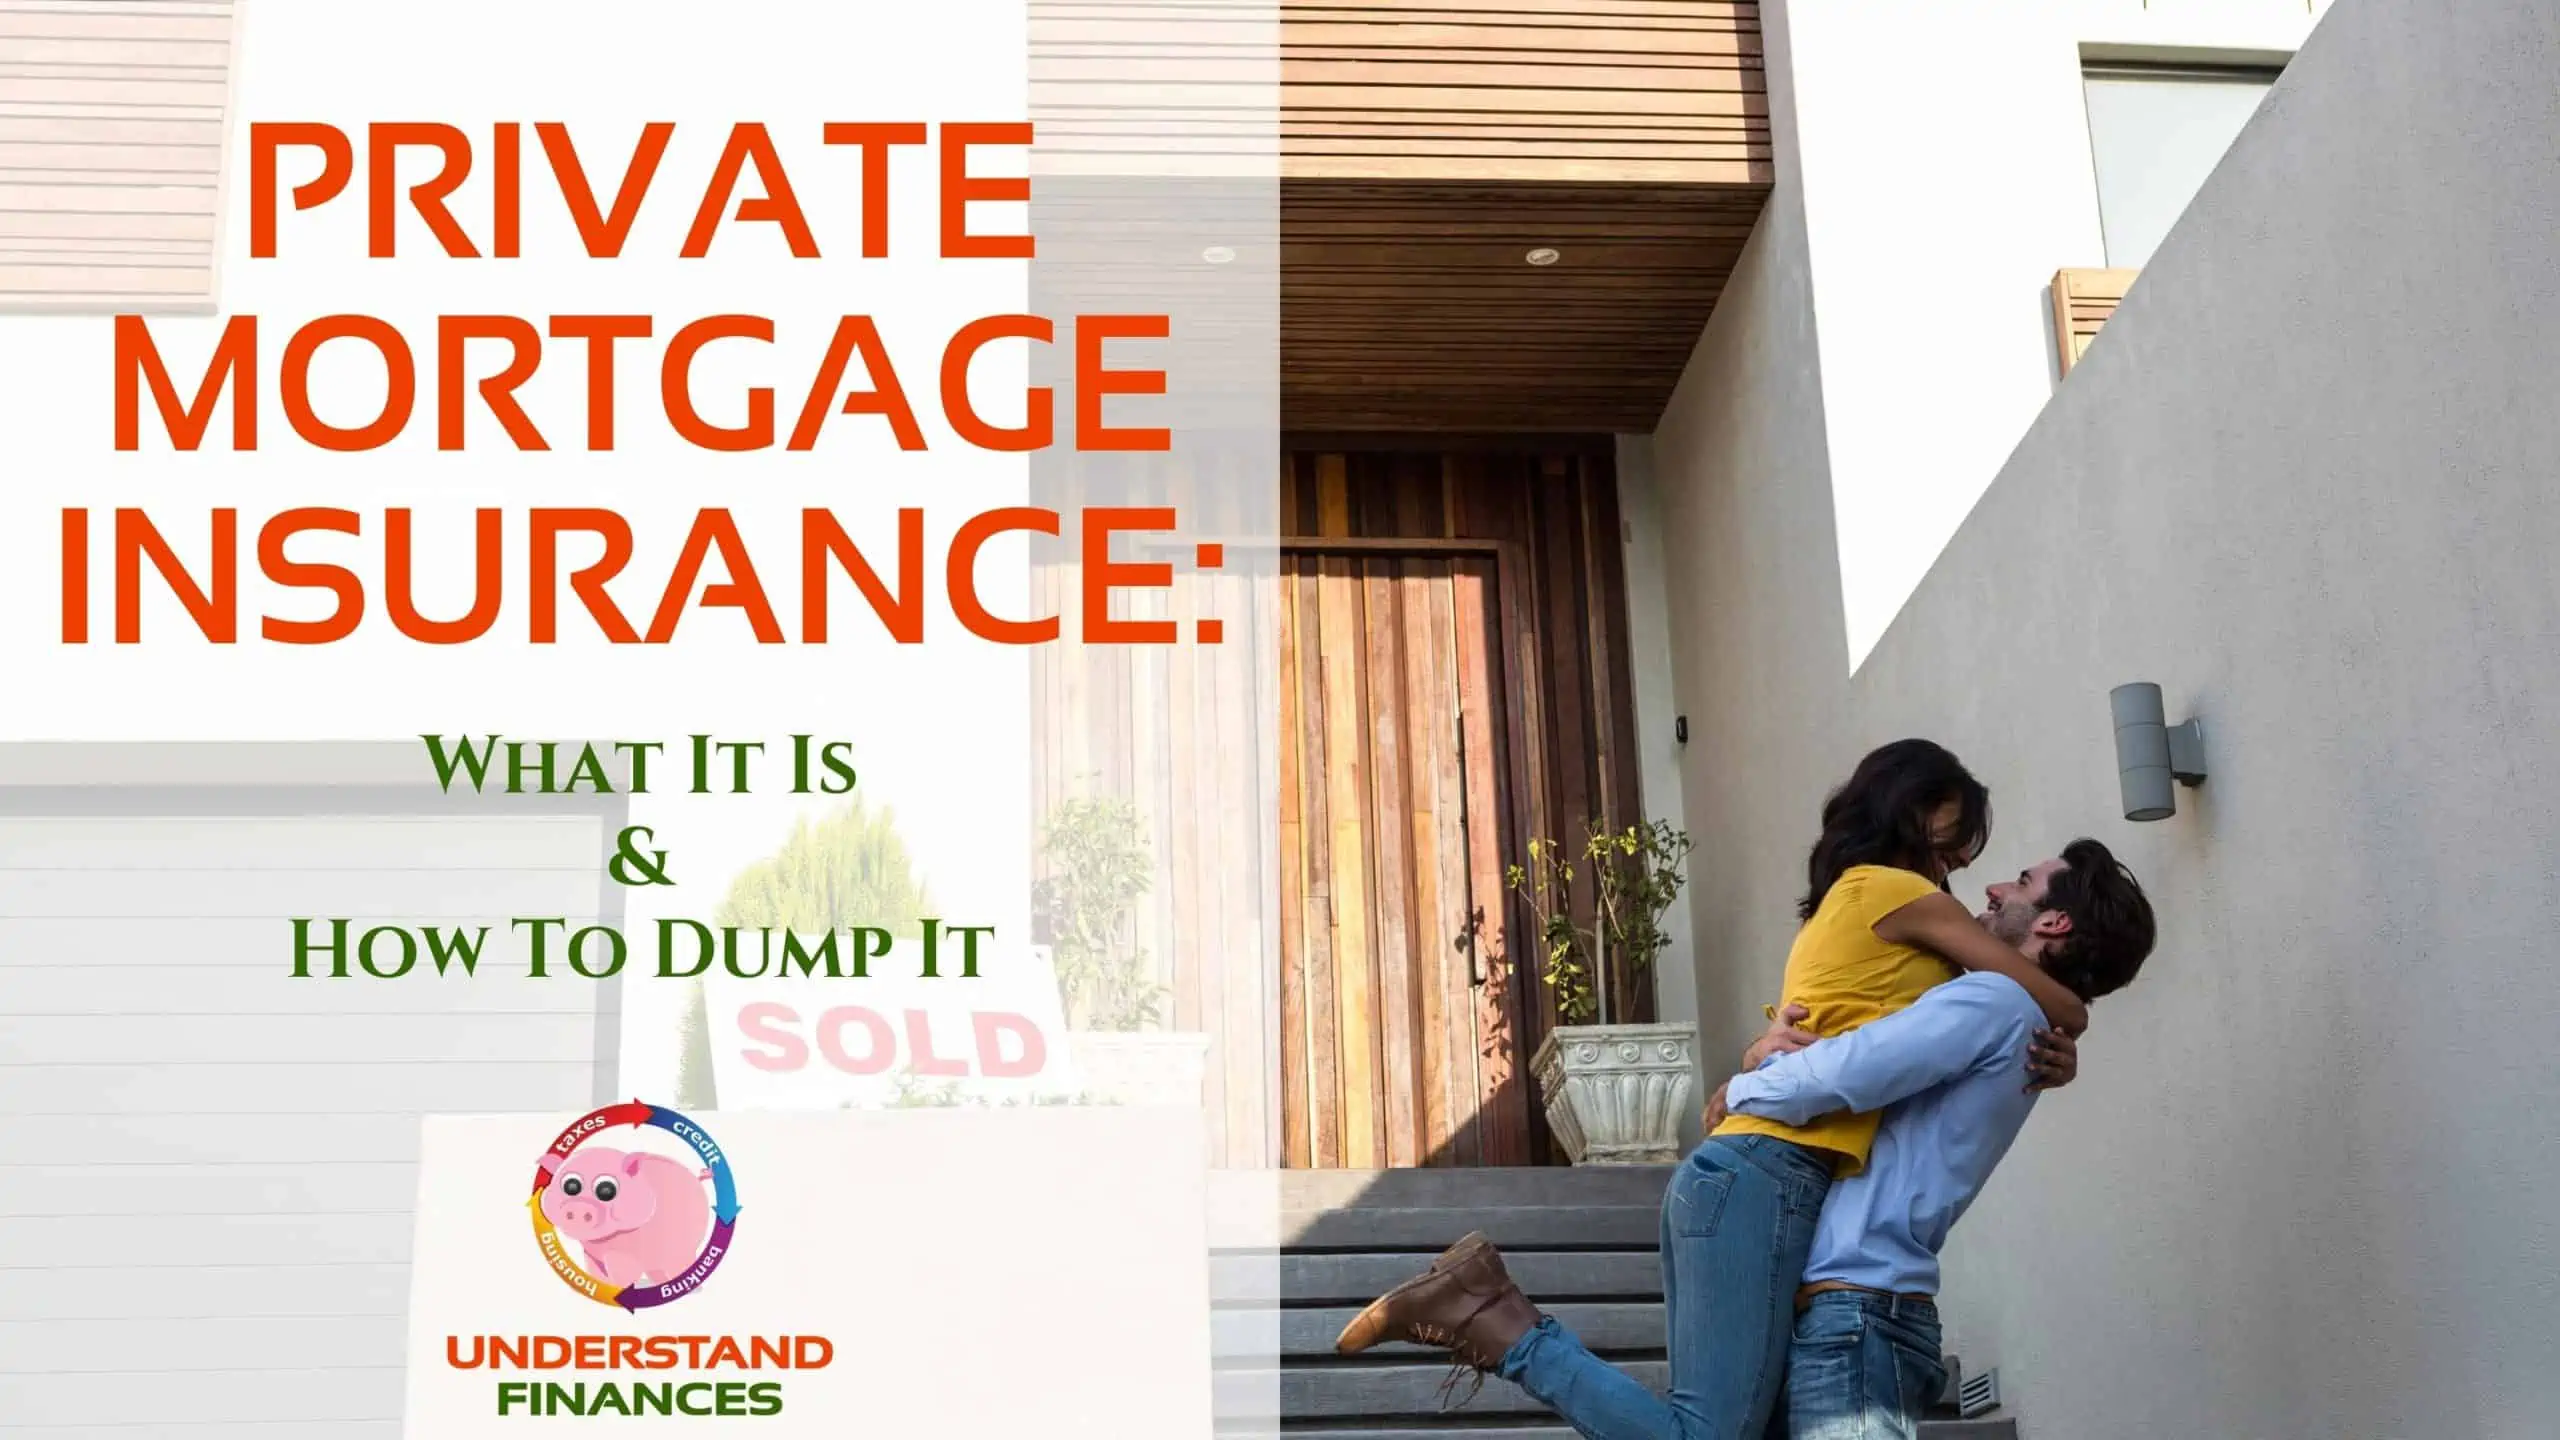 Private Mortgage Insurance: What It Is & How To Dump It